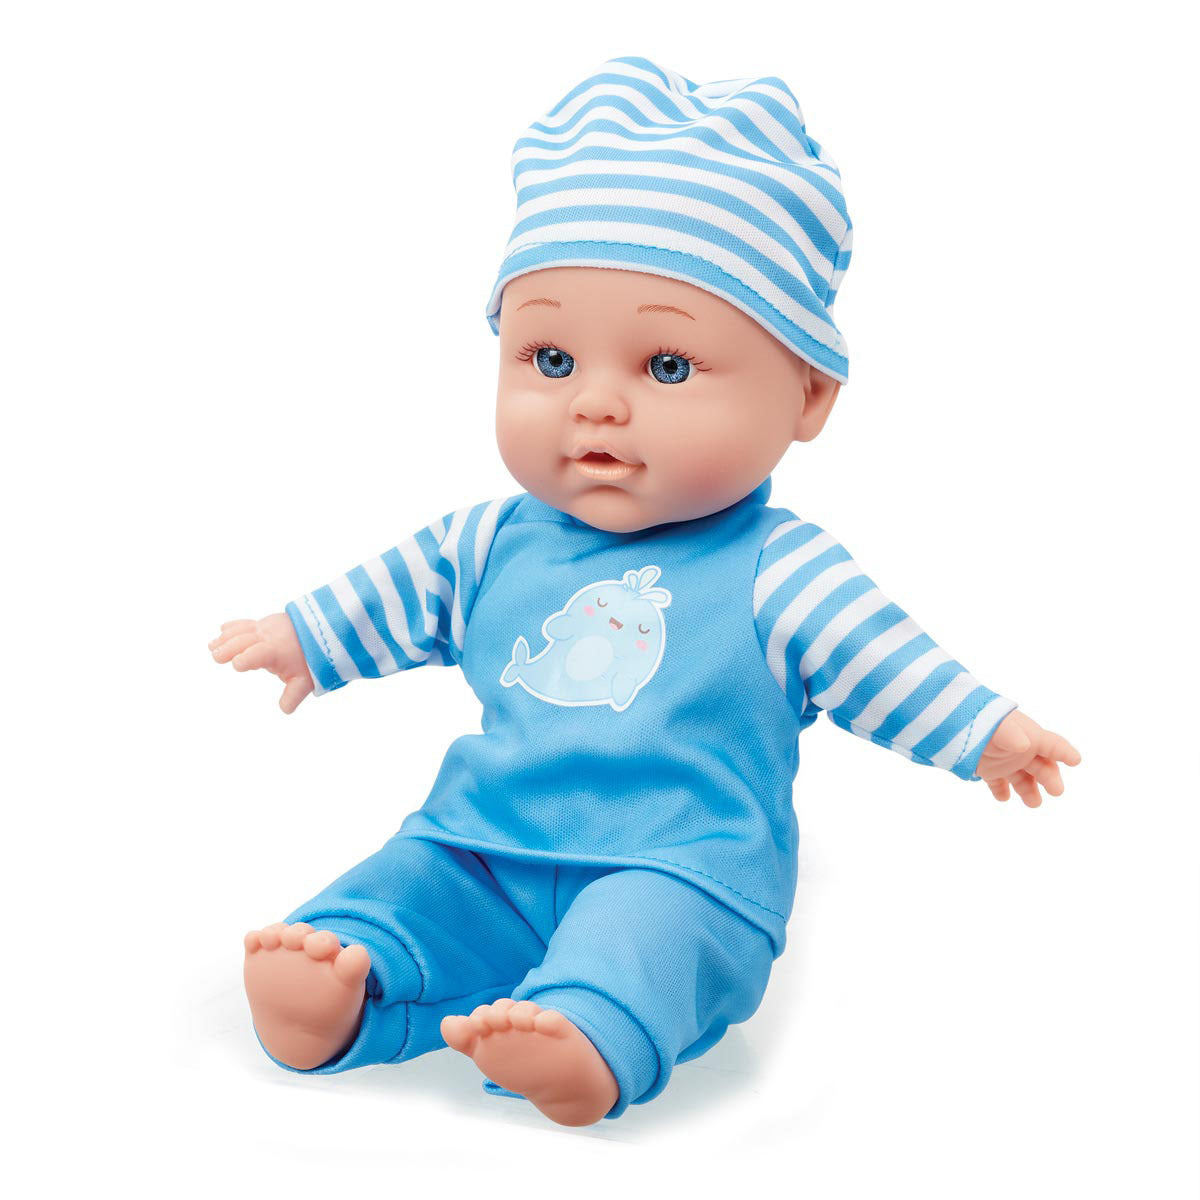 Be My Baby Cuddly Baby - Blue Outfit